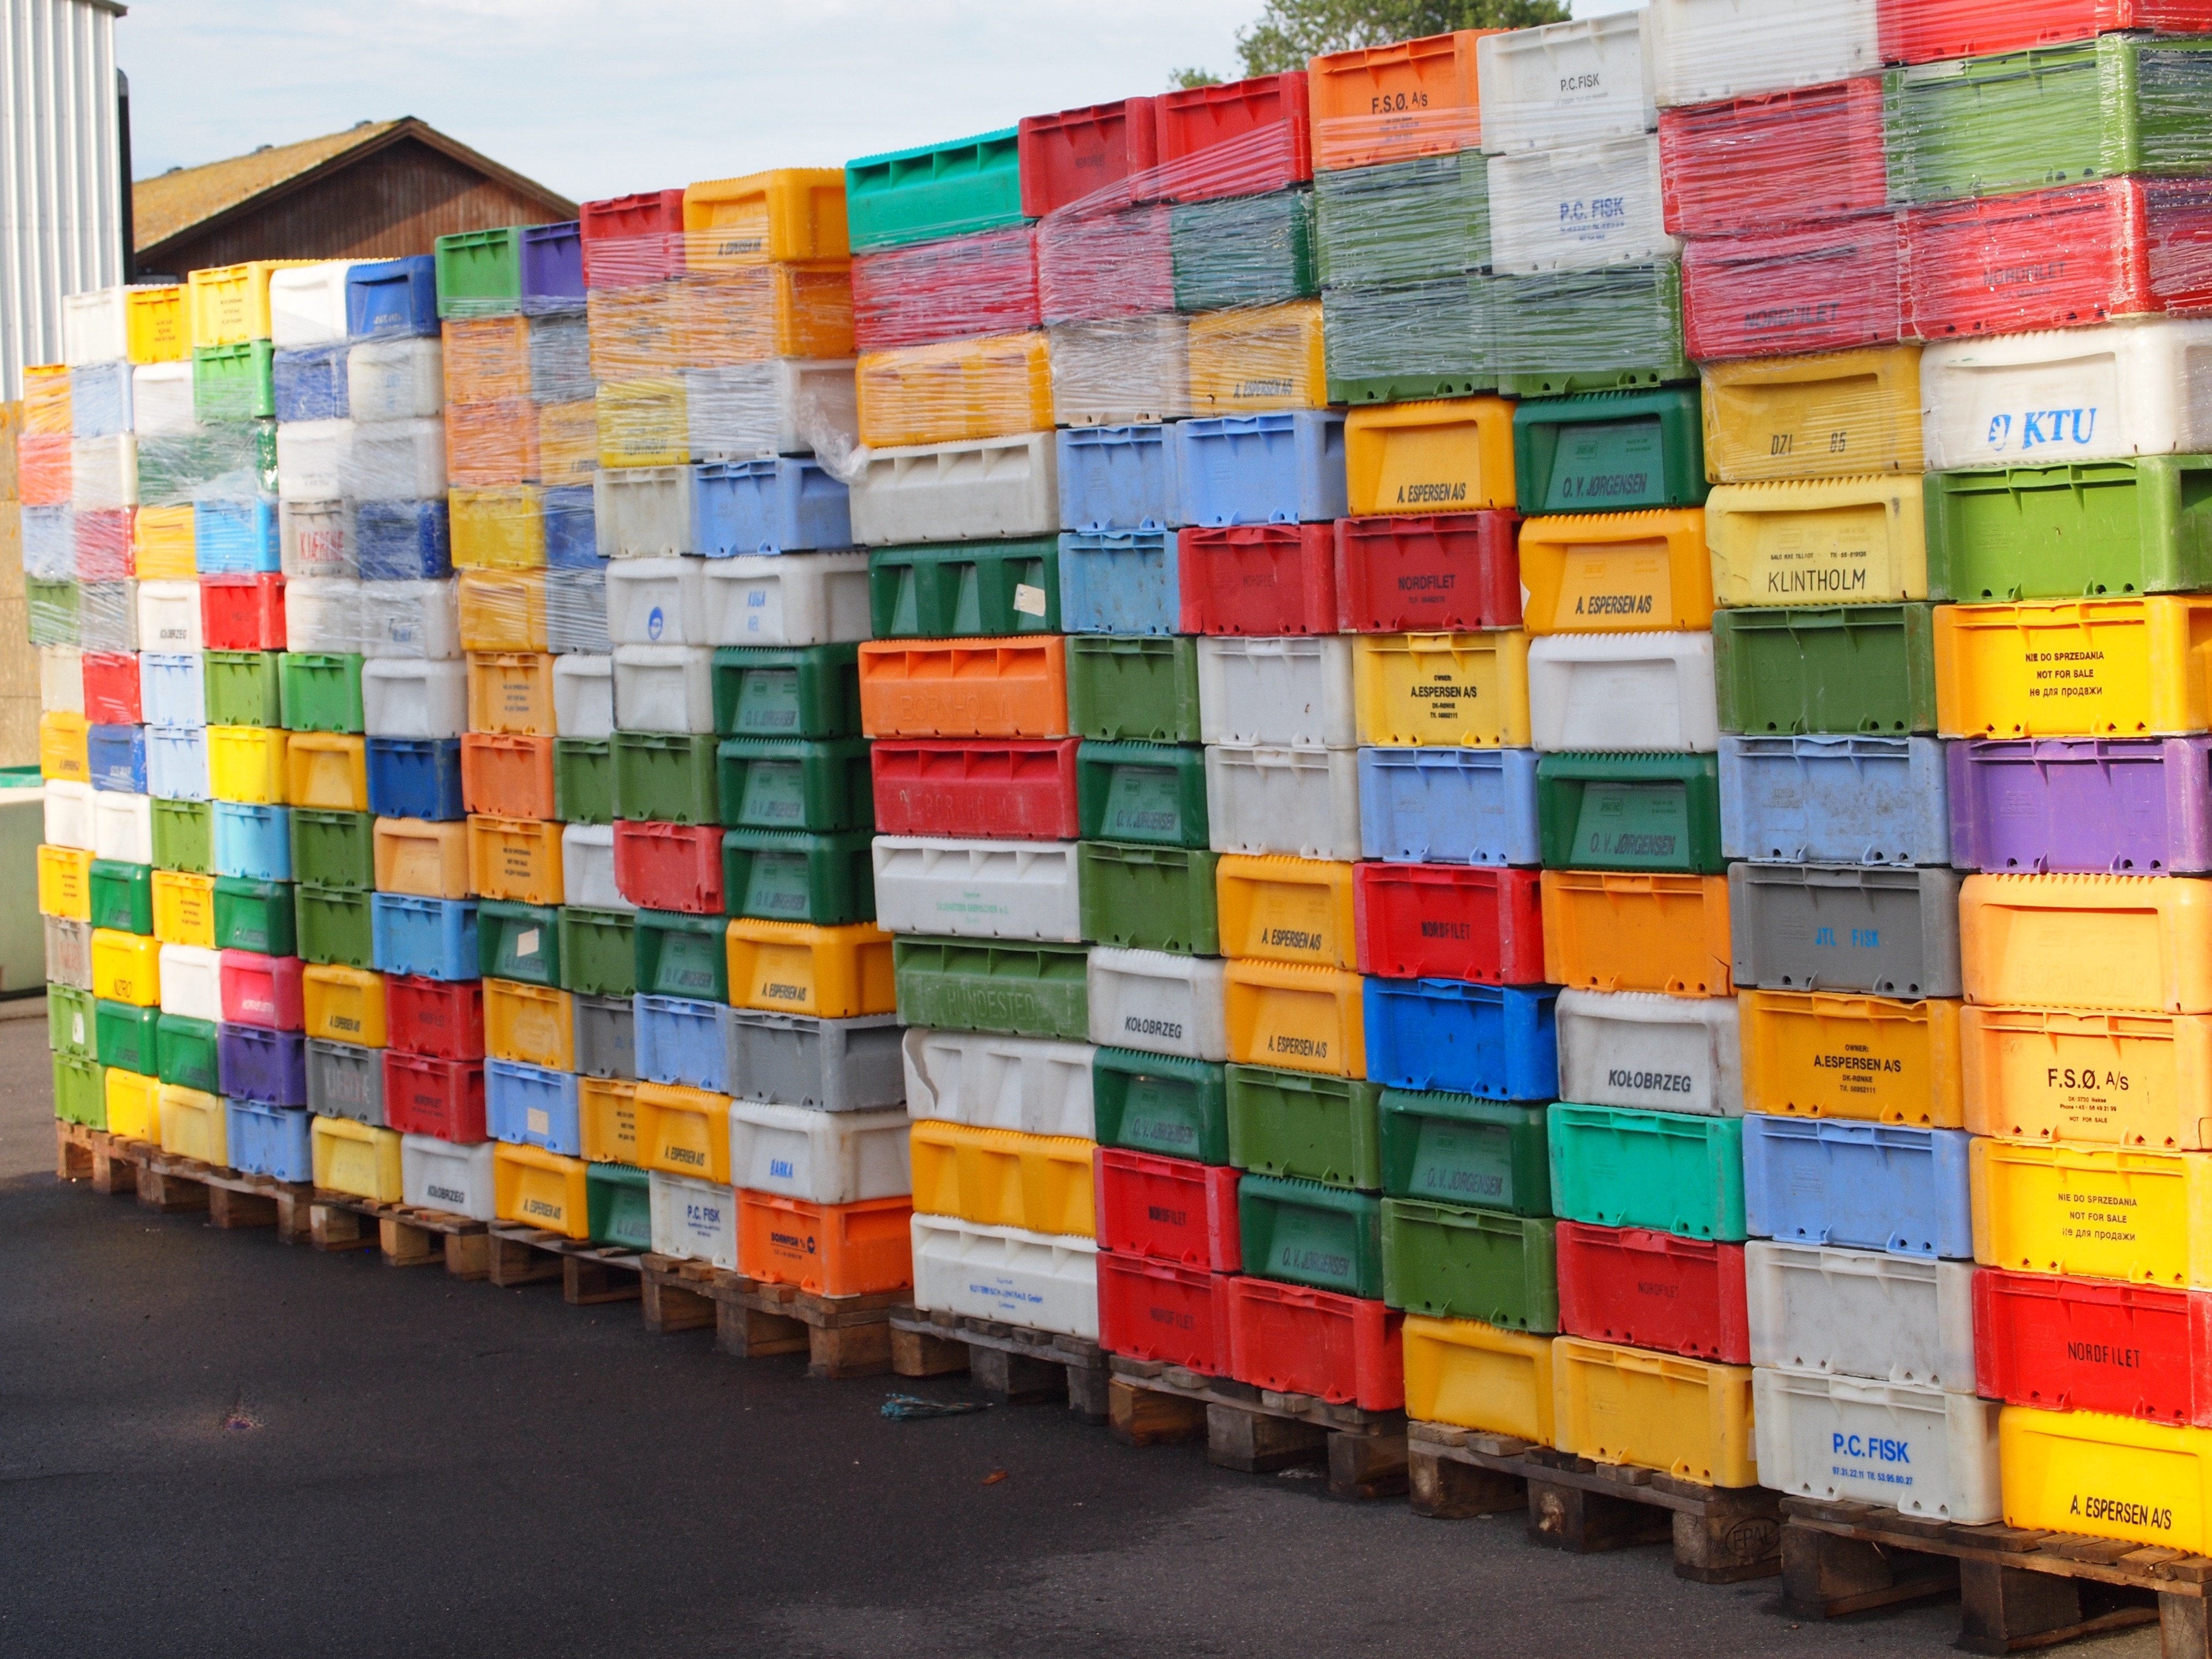 Fish Boxes, Port, Fishing, Denmark, multi colored, no people